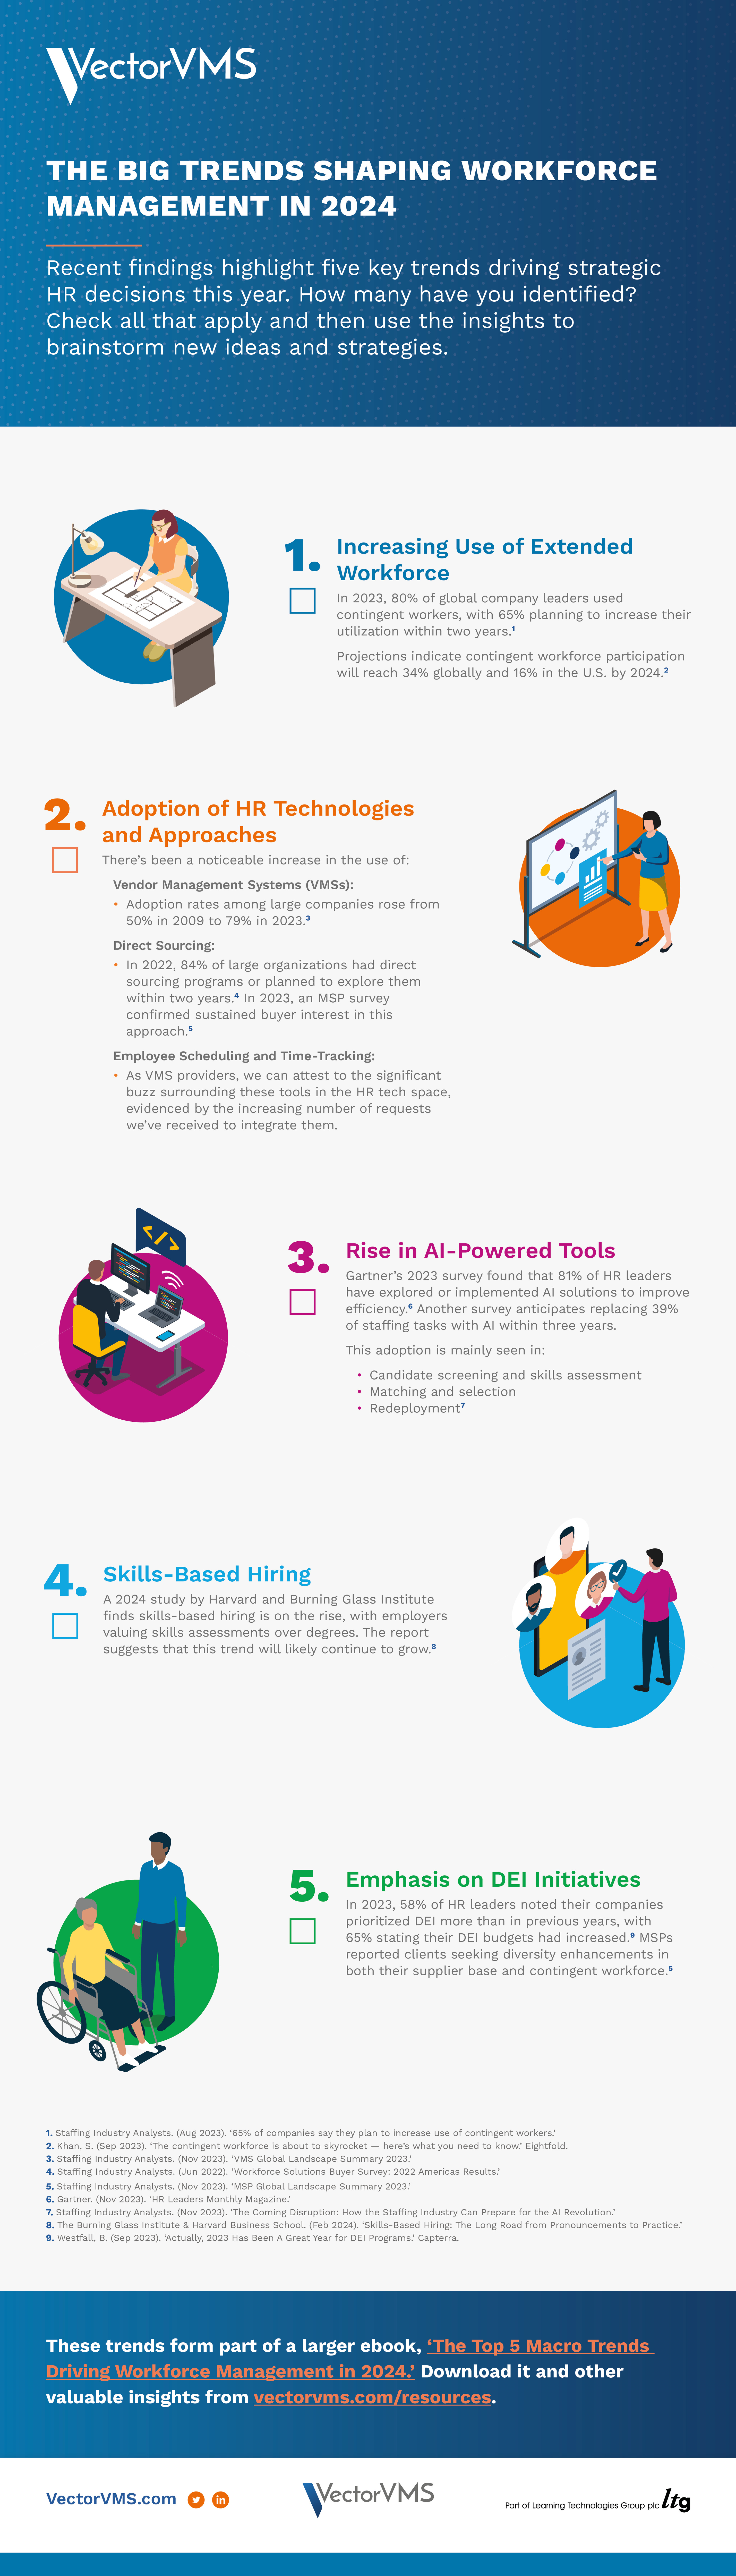 VVMS infographic on The Big Trends Shaping Workforce Management in 2024